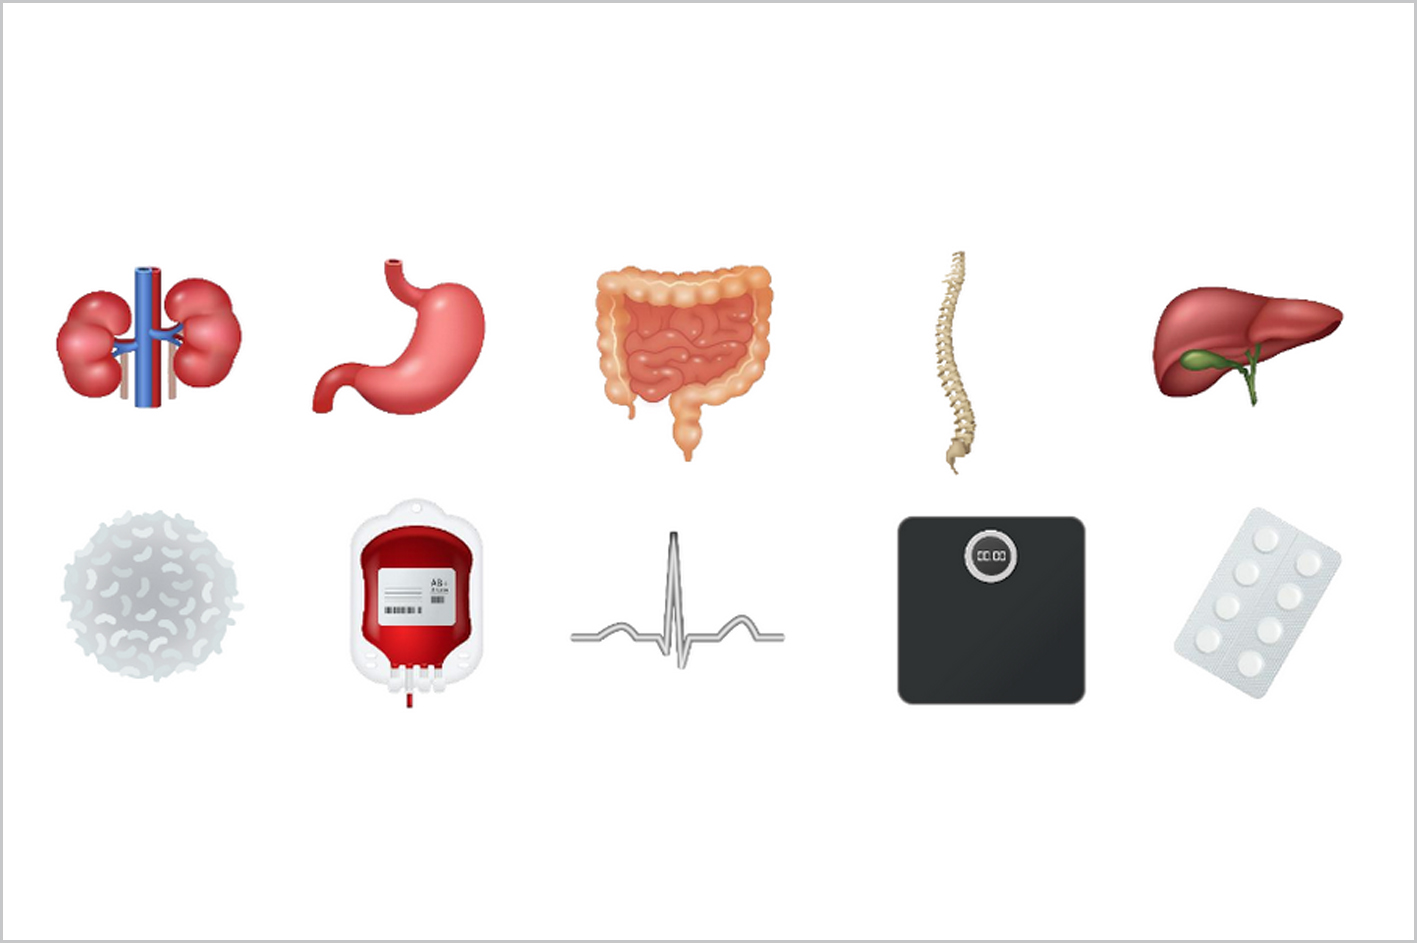 Physicians, patient advocates and volunteers launch an online campaign for more “medical” emoji to approved by UNICODE